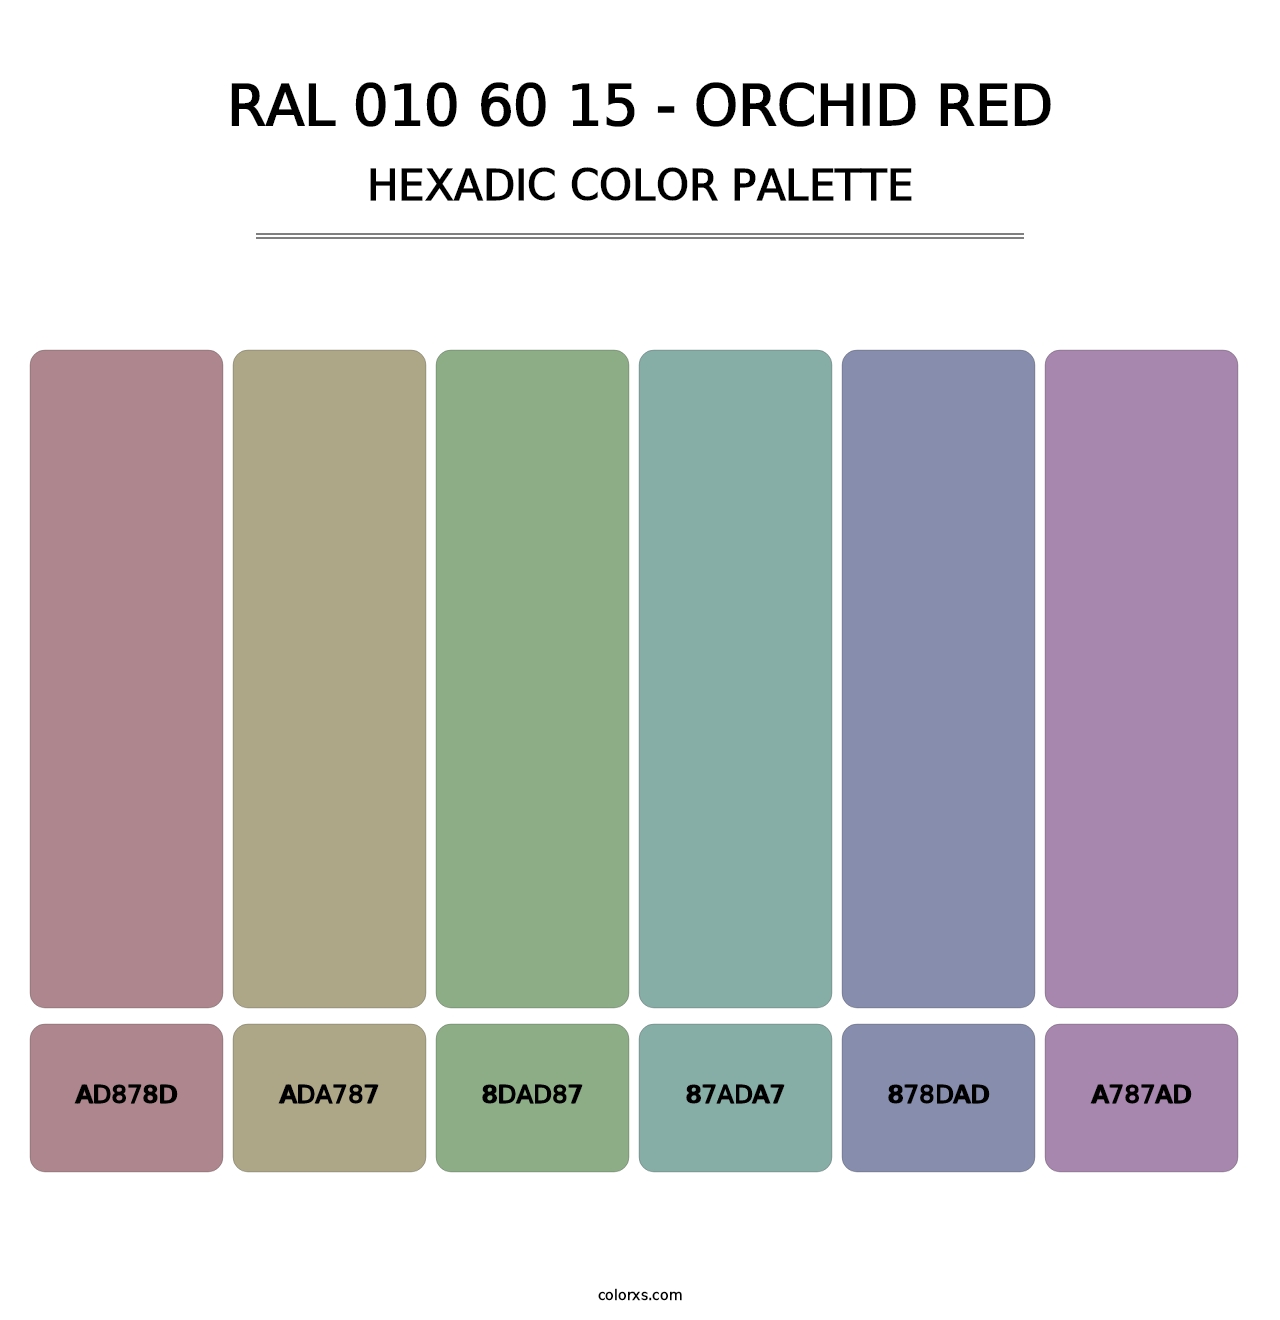 RAL 010 60 15 - Orchid Red - Hexadic Color Palette